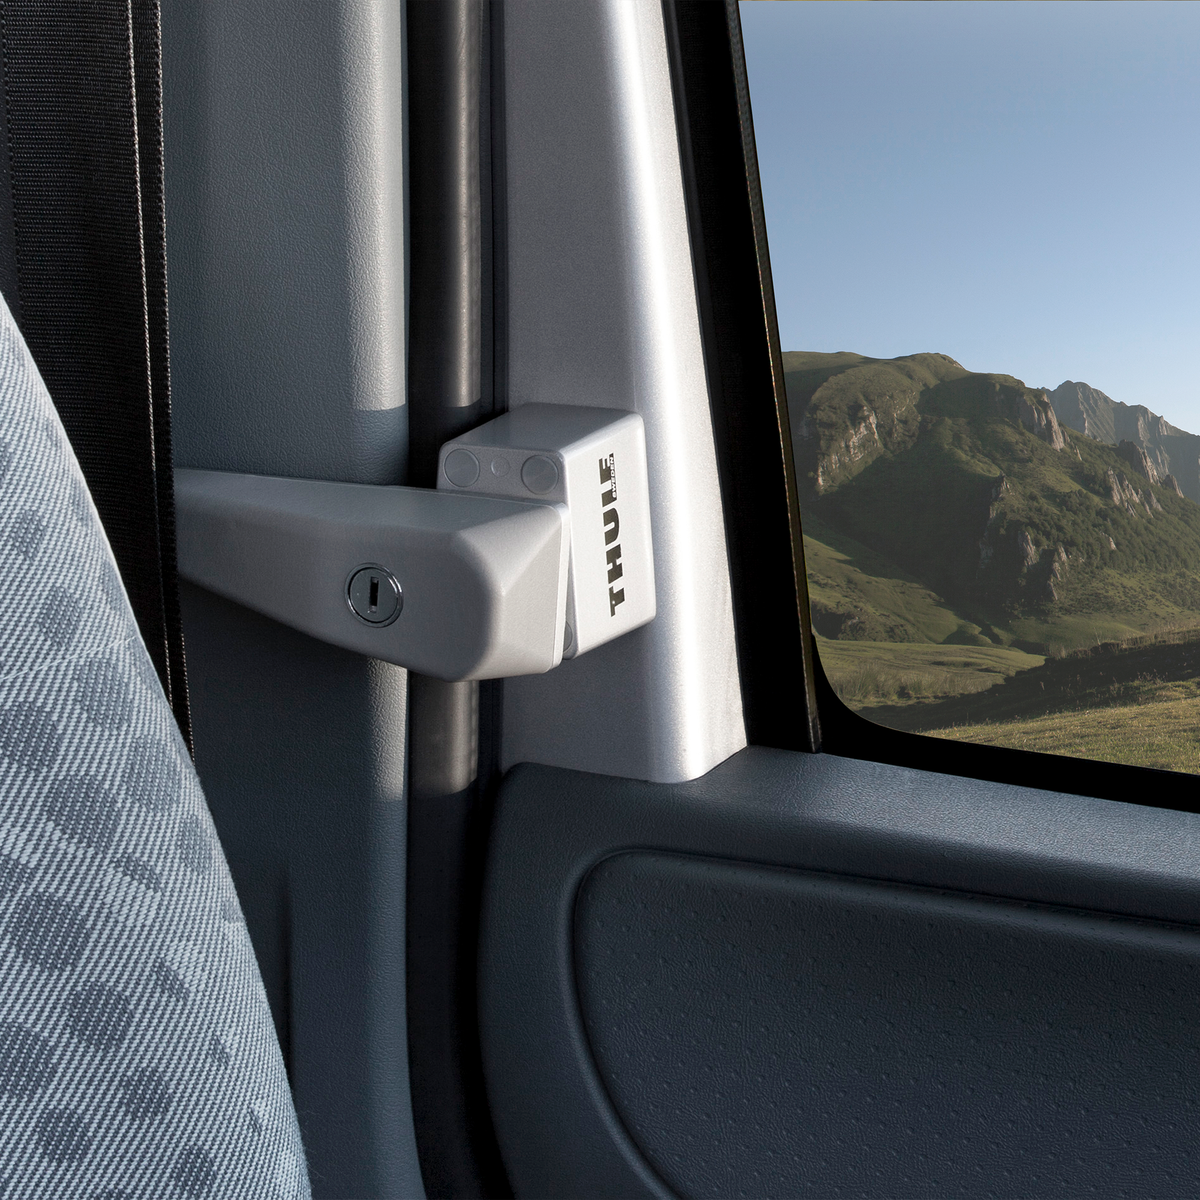 From inside a van, we can see the mountains outside the window with a Thule Cab Lock.